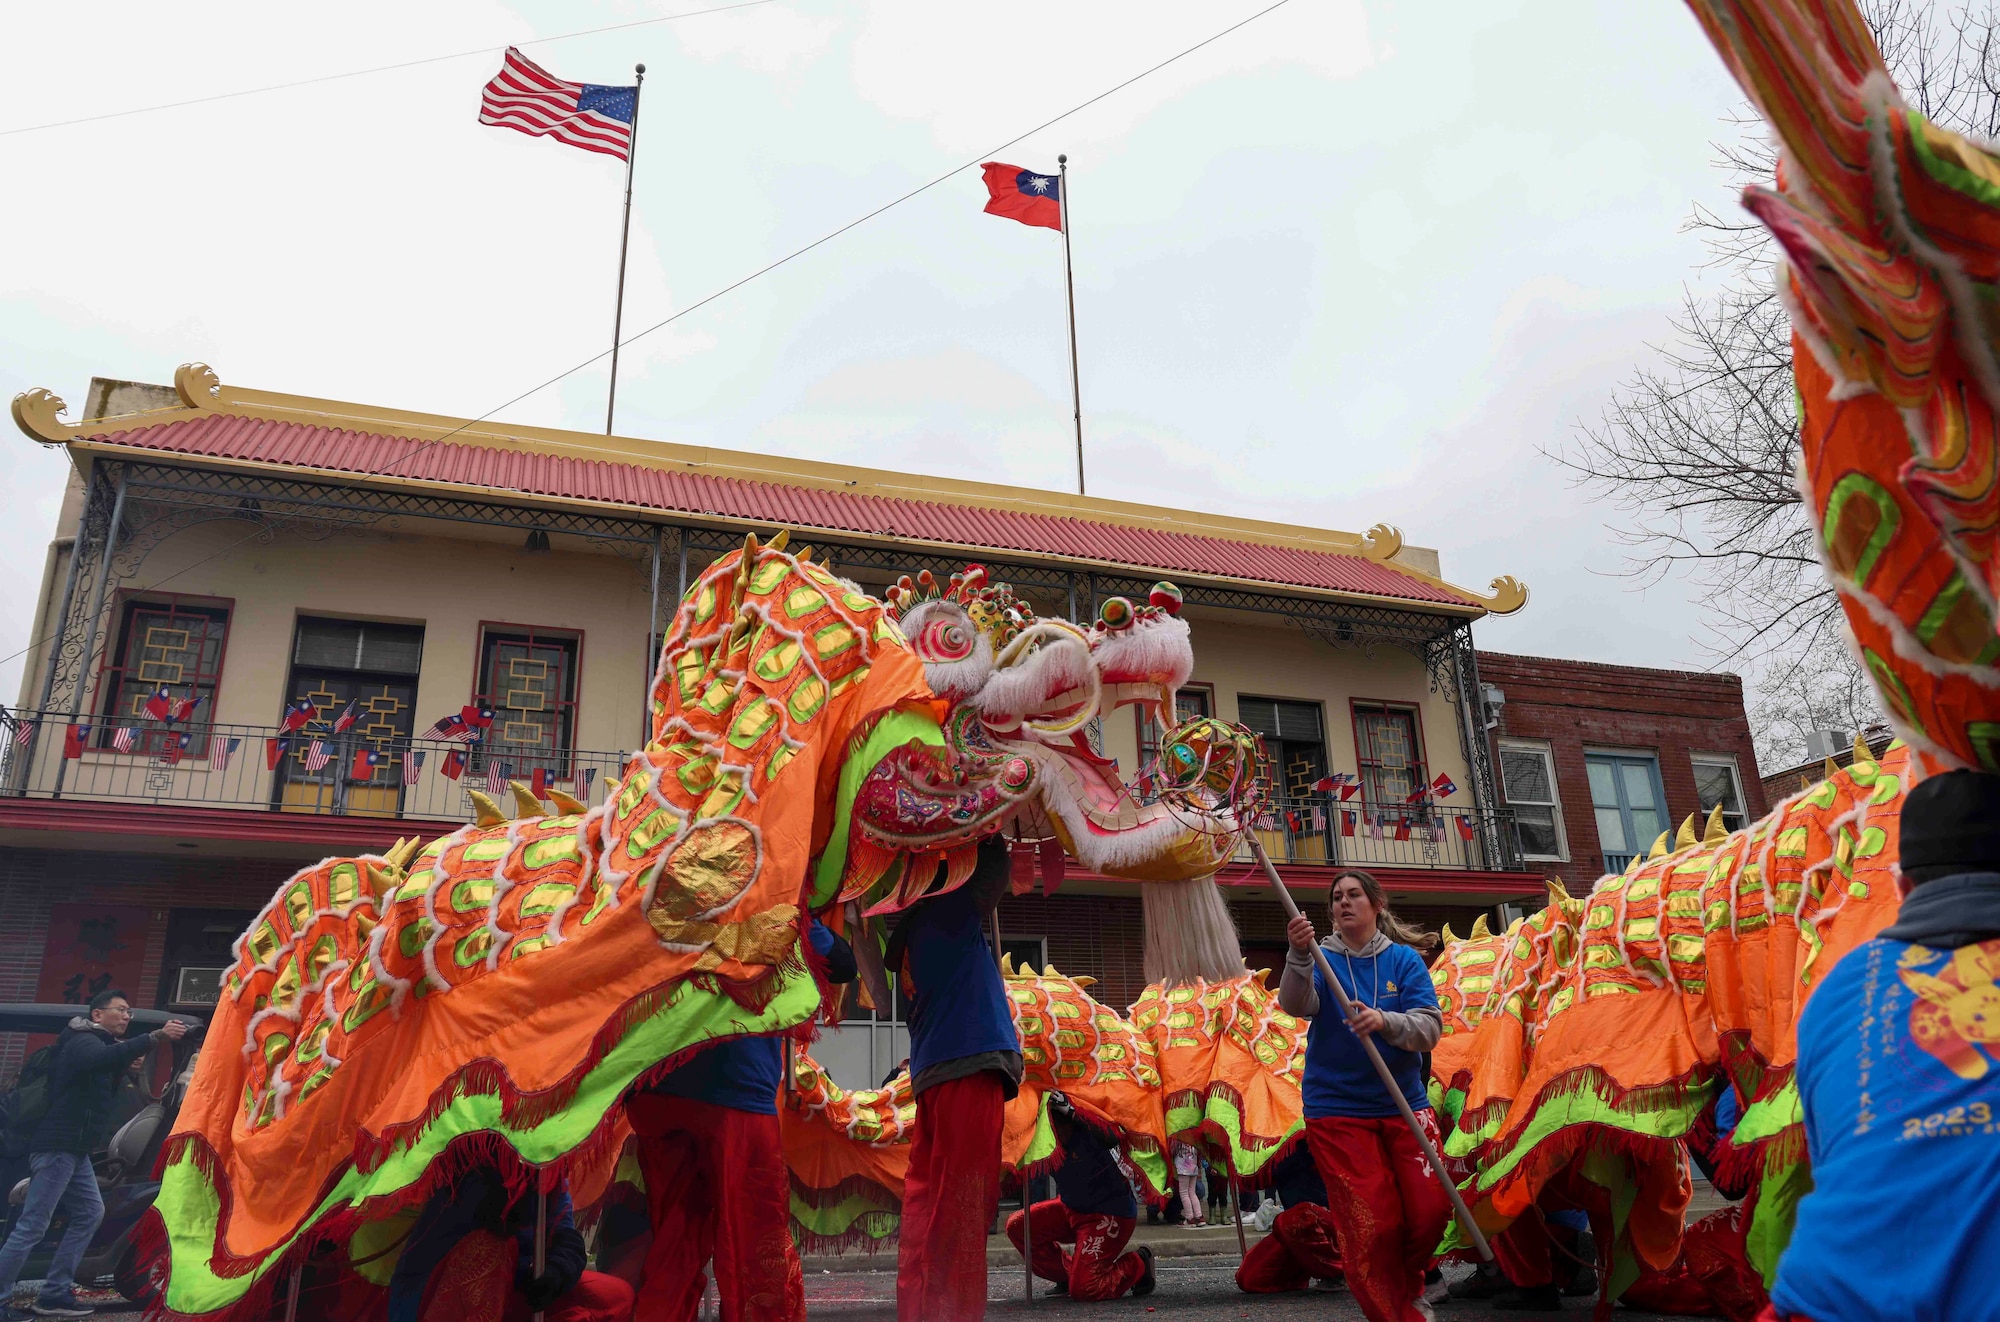 Airmen from Beale Air Force Base, Calif., lifted the dragon “Hong Wan Lung” in front of the Chinese Community Center during the 143rd Bok Kai parade on Feb. 25, 2023, in Marysville, Calif.